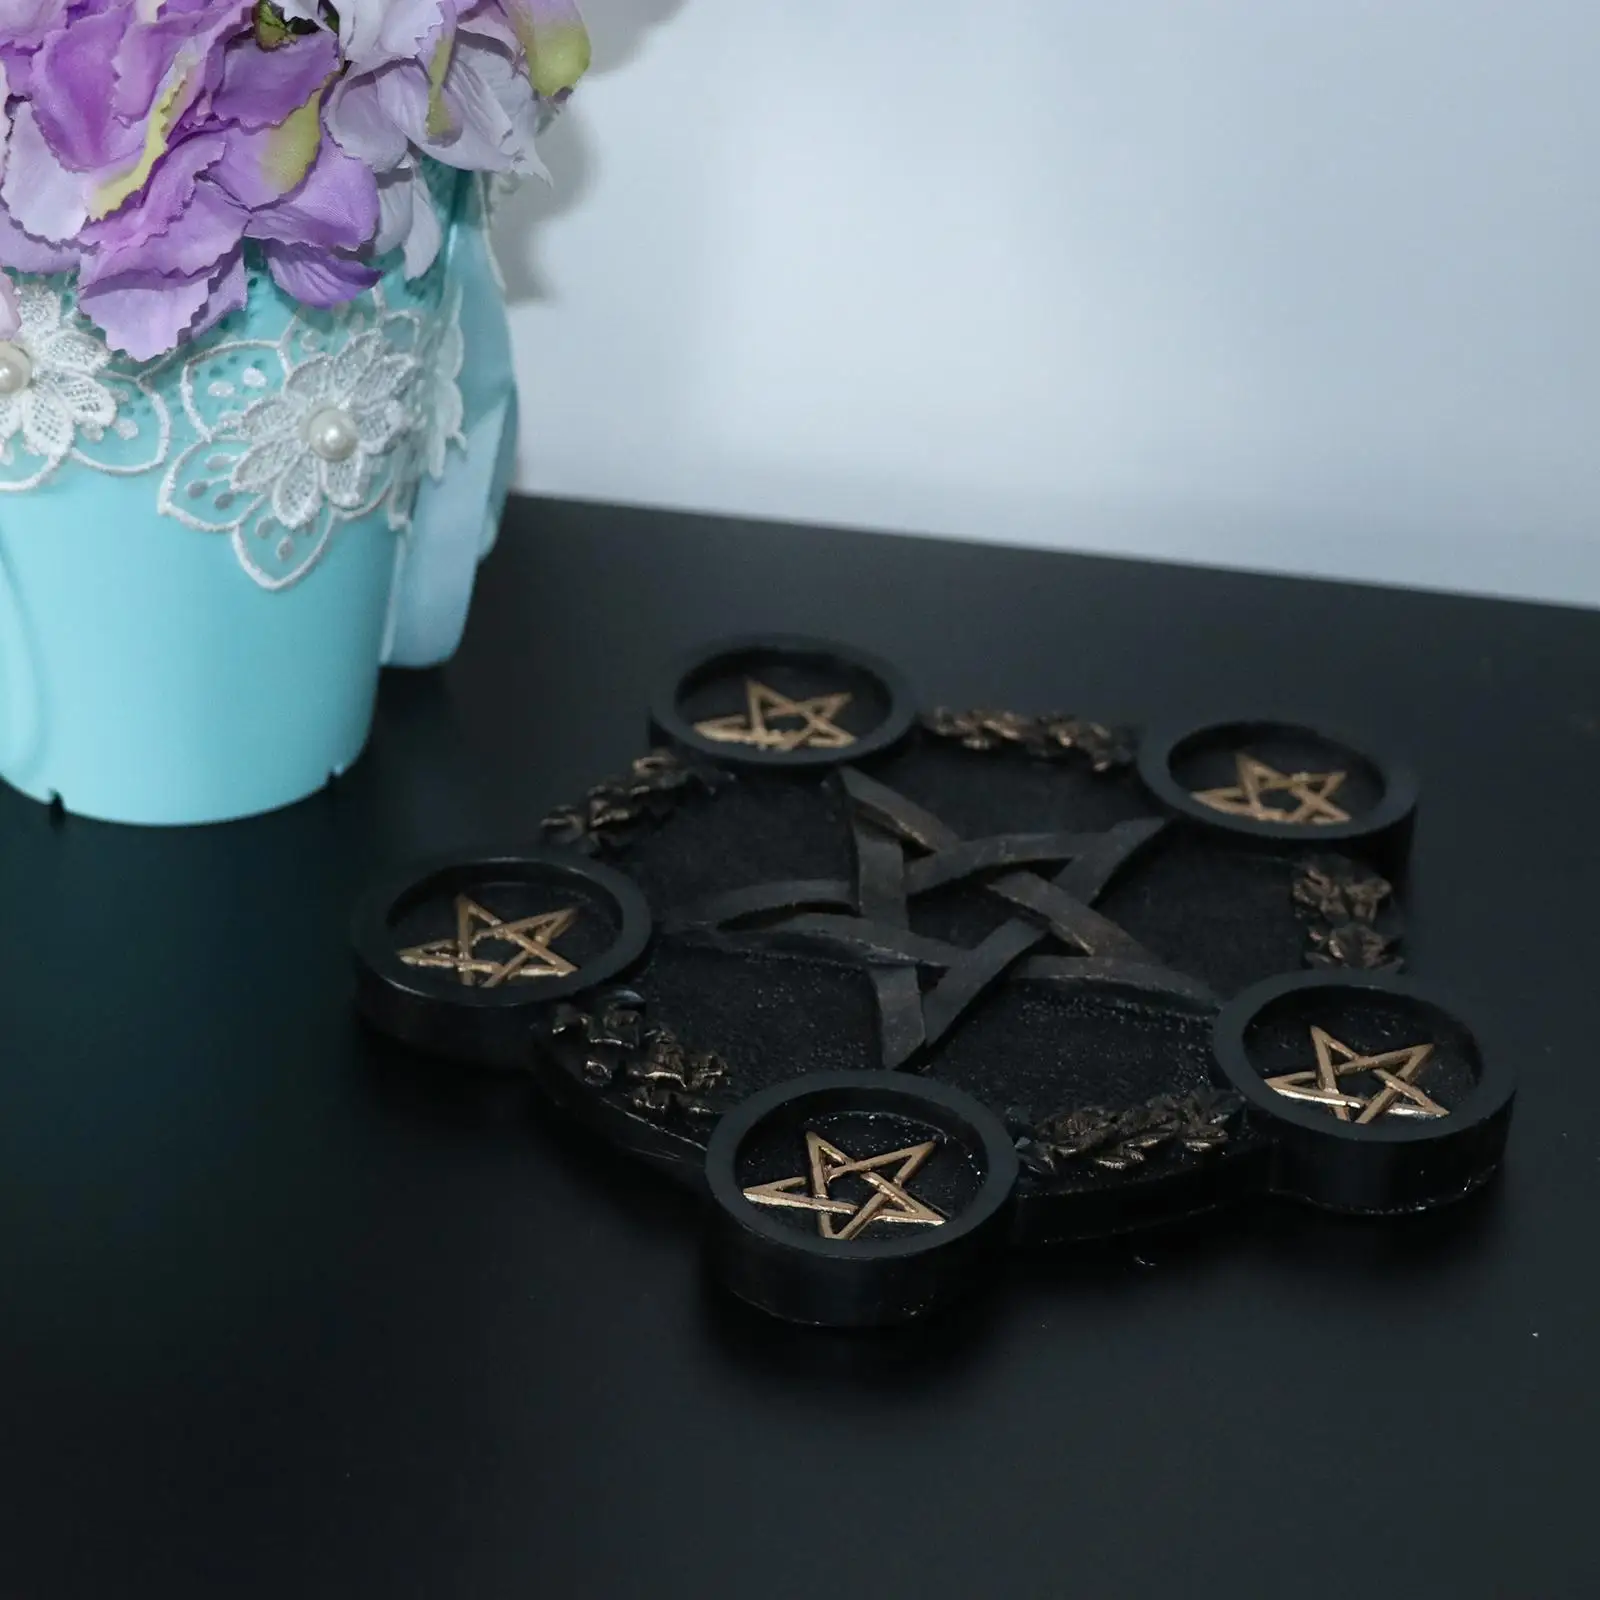 Ceremony Candle Home Tealight Holder Decorative Candlestick Plate Ornament Decoration